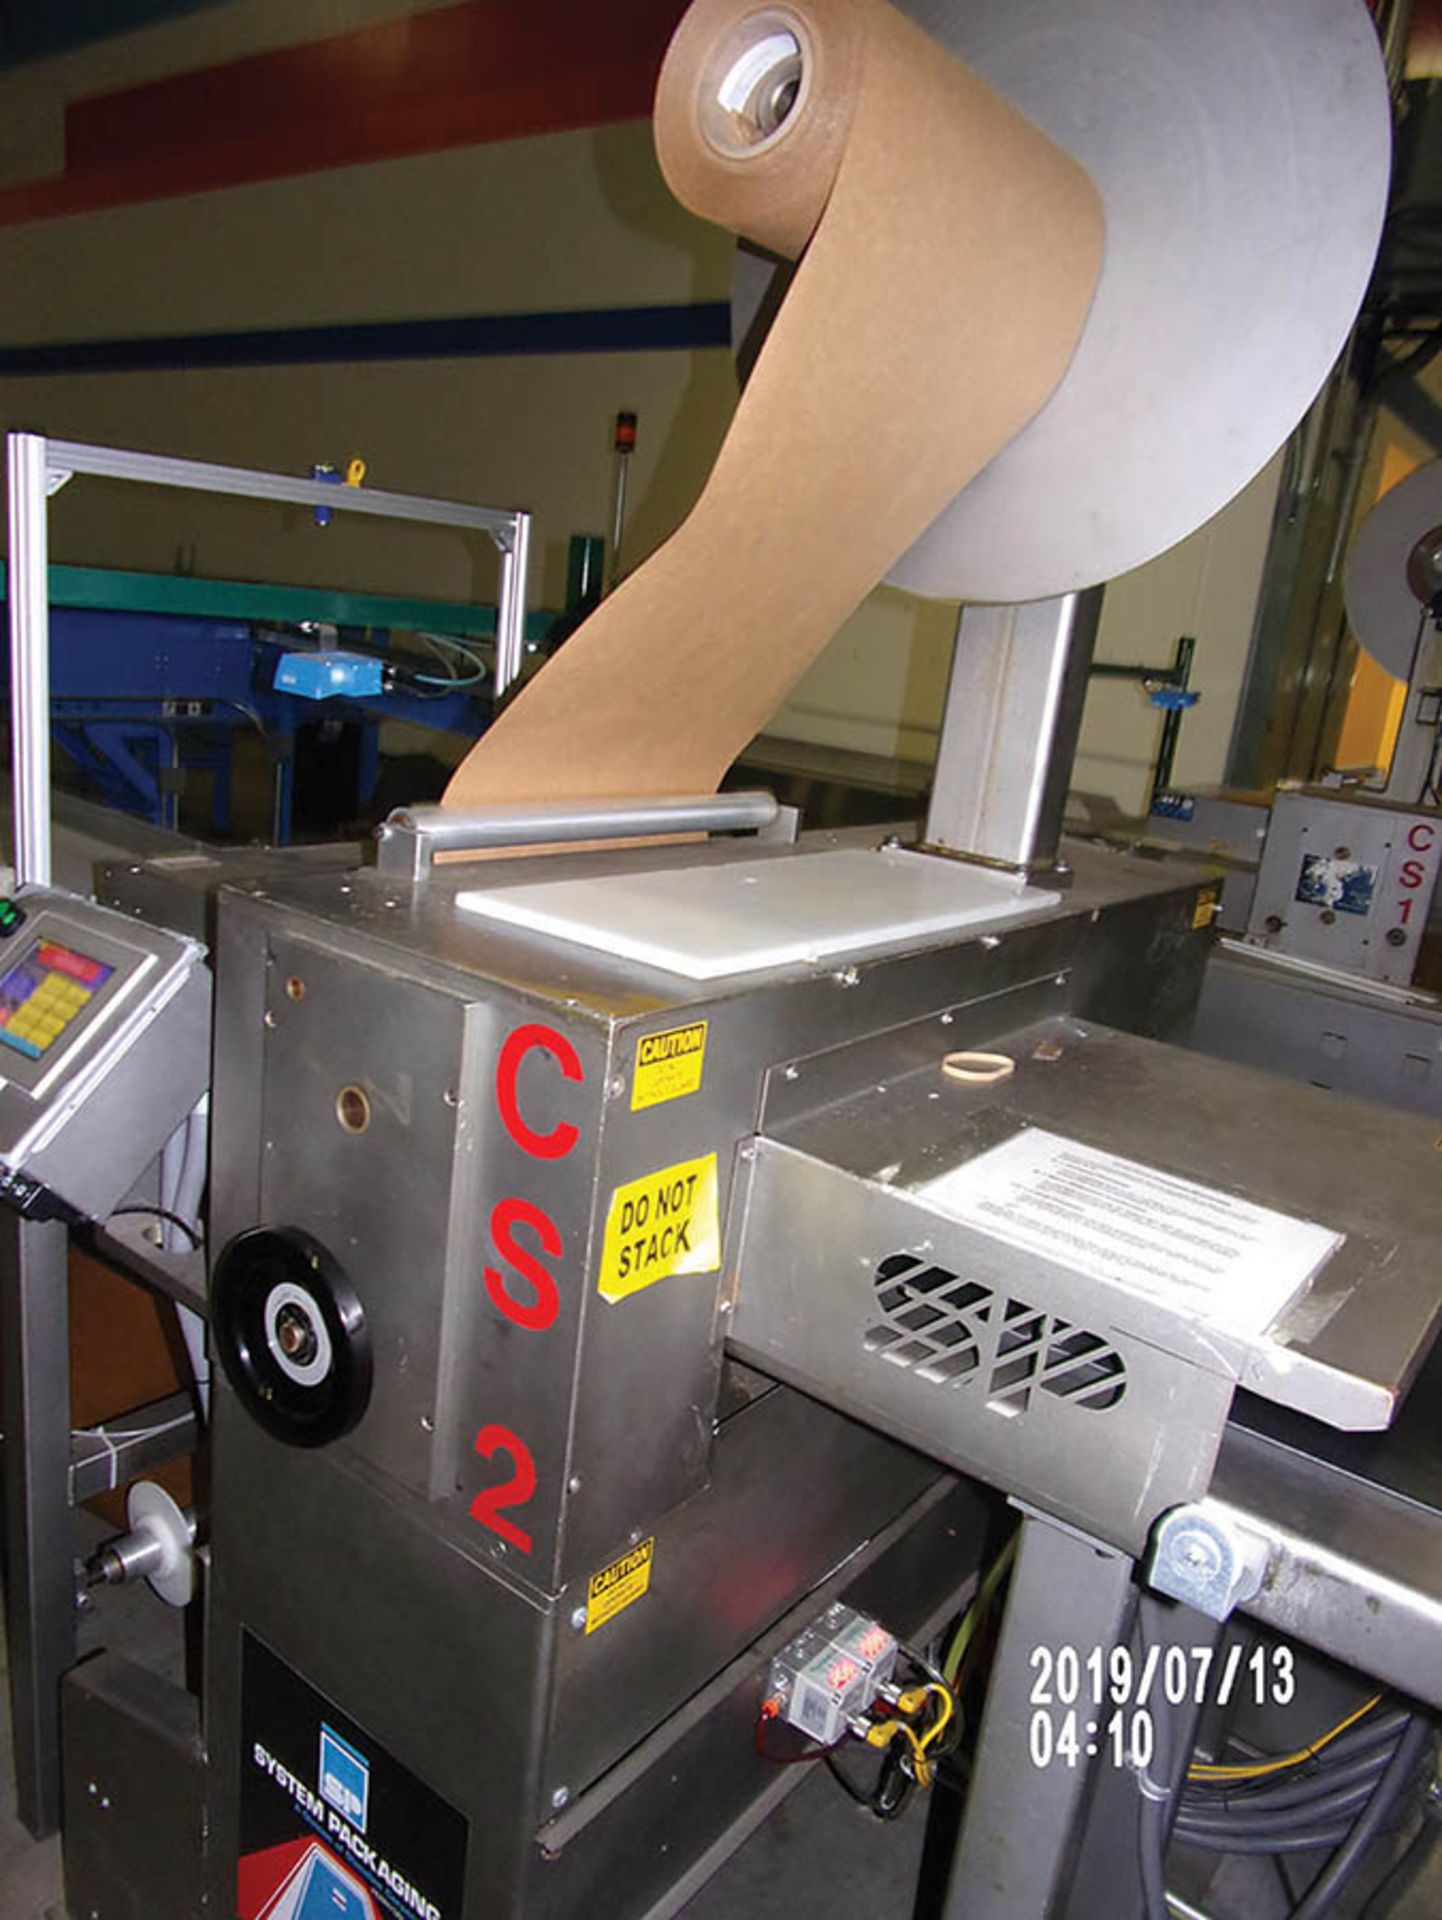 SYSTEMS PACKAGING COLD SEAL PACKAGING MACHINE; MODEL 9000-18B, 120V, S/N 9018B-161204-0713 - Image 3 of 4